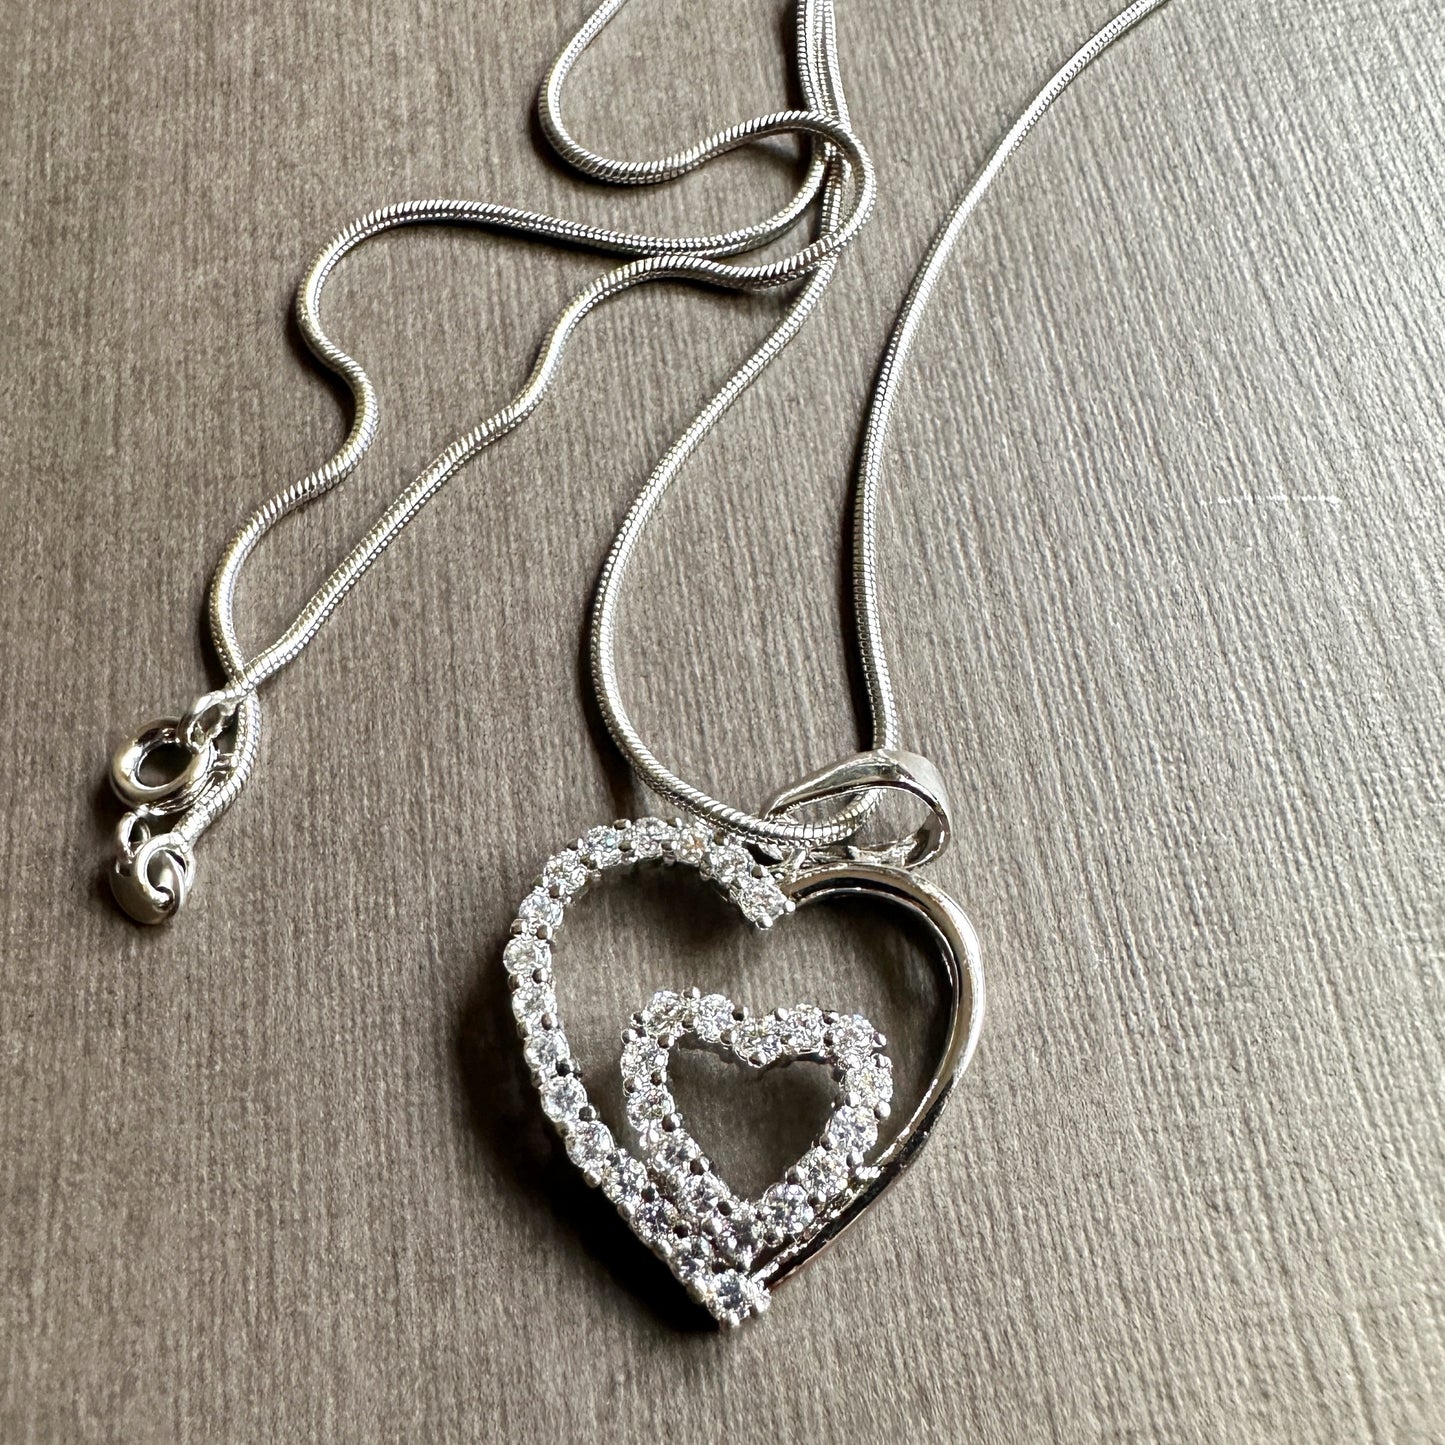 Heart On Heart Necklace